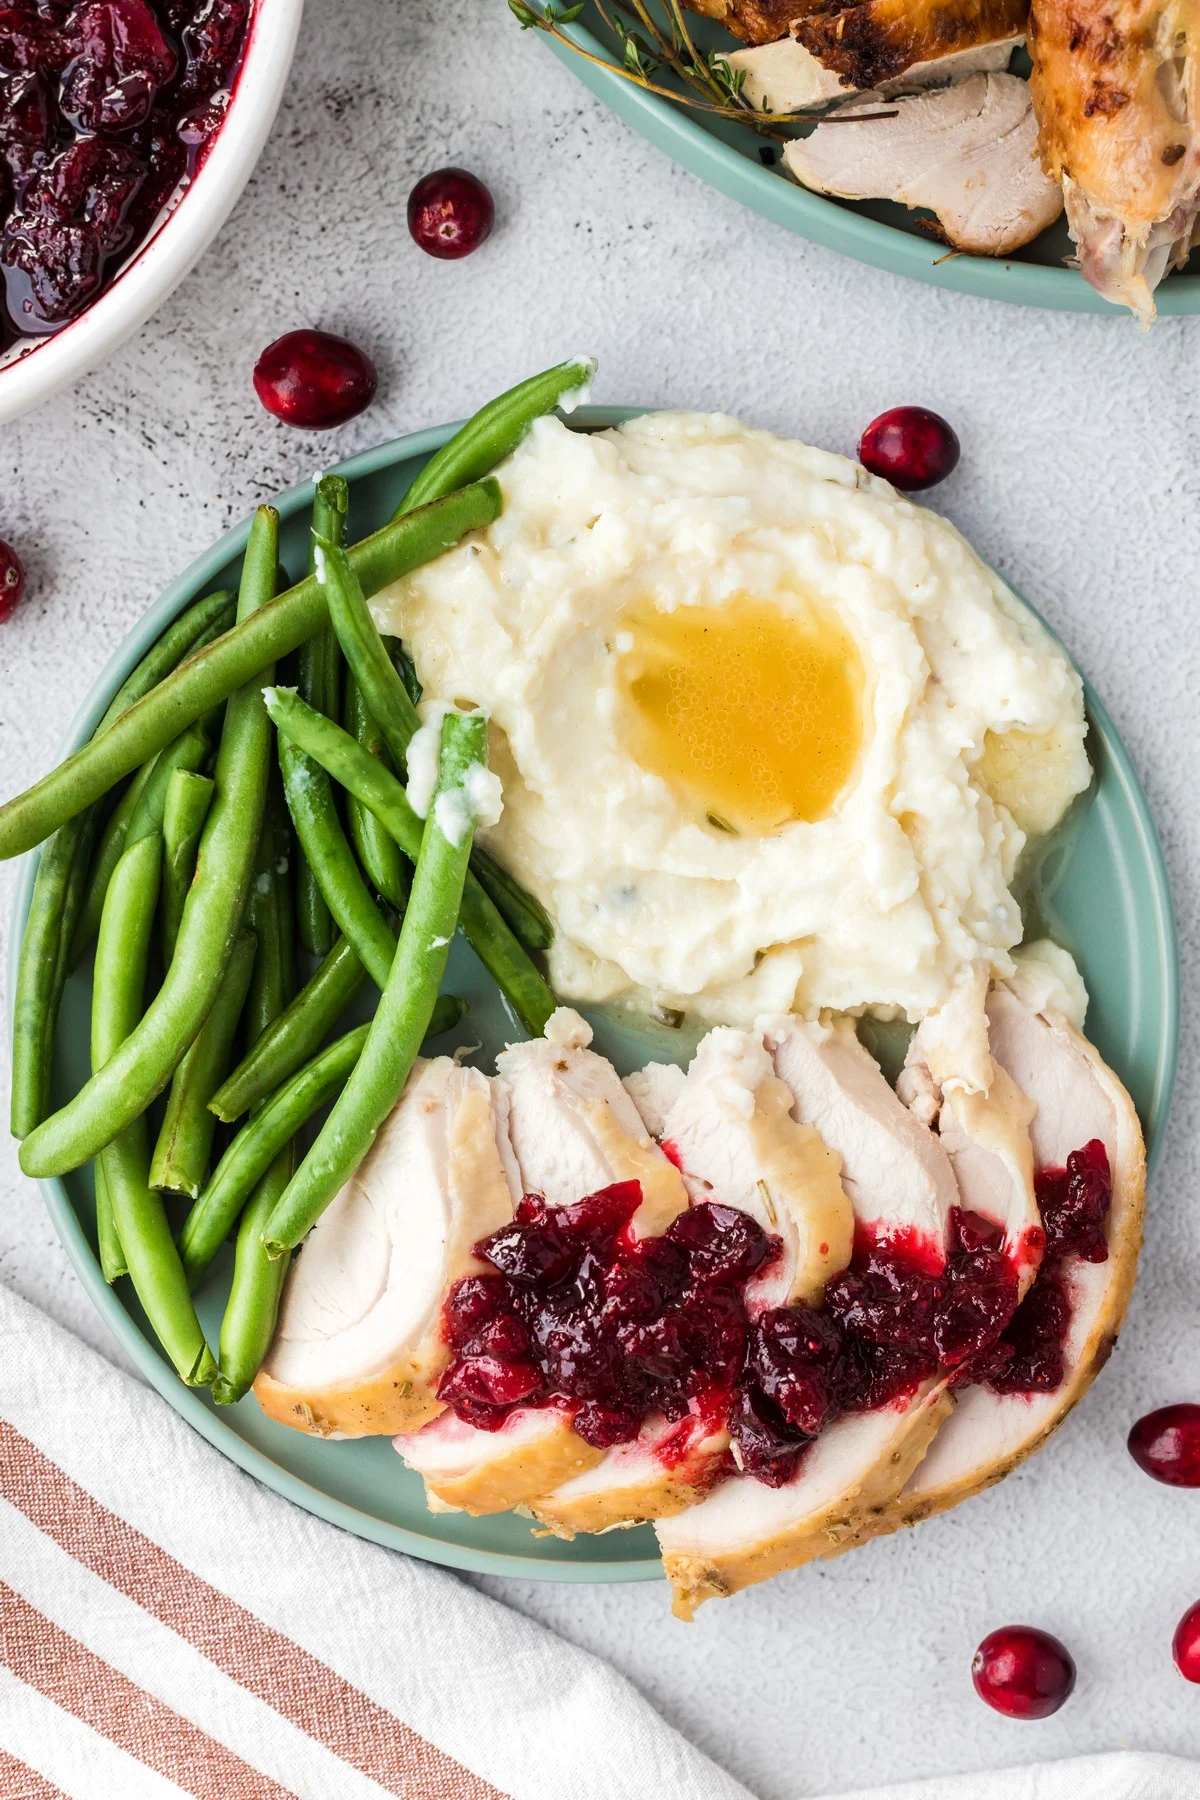 cranberry sauce with turkey, green beans, and mashed potatoes